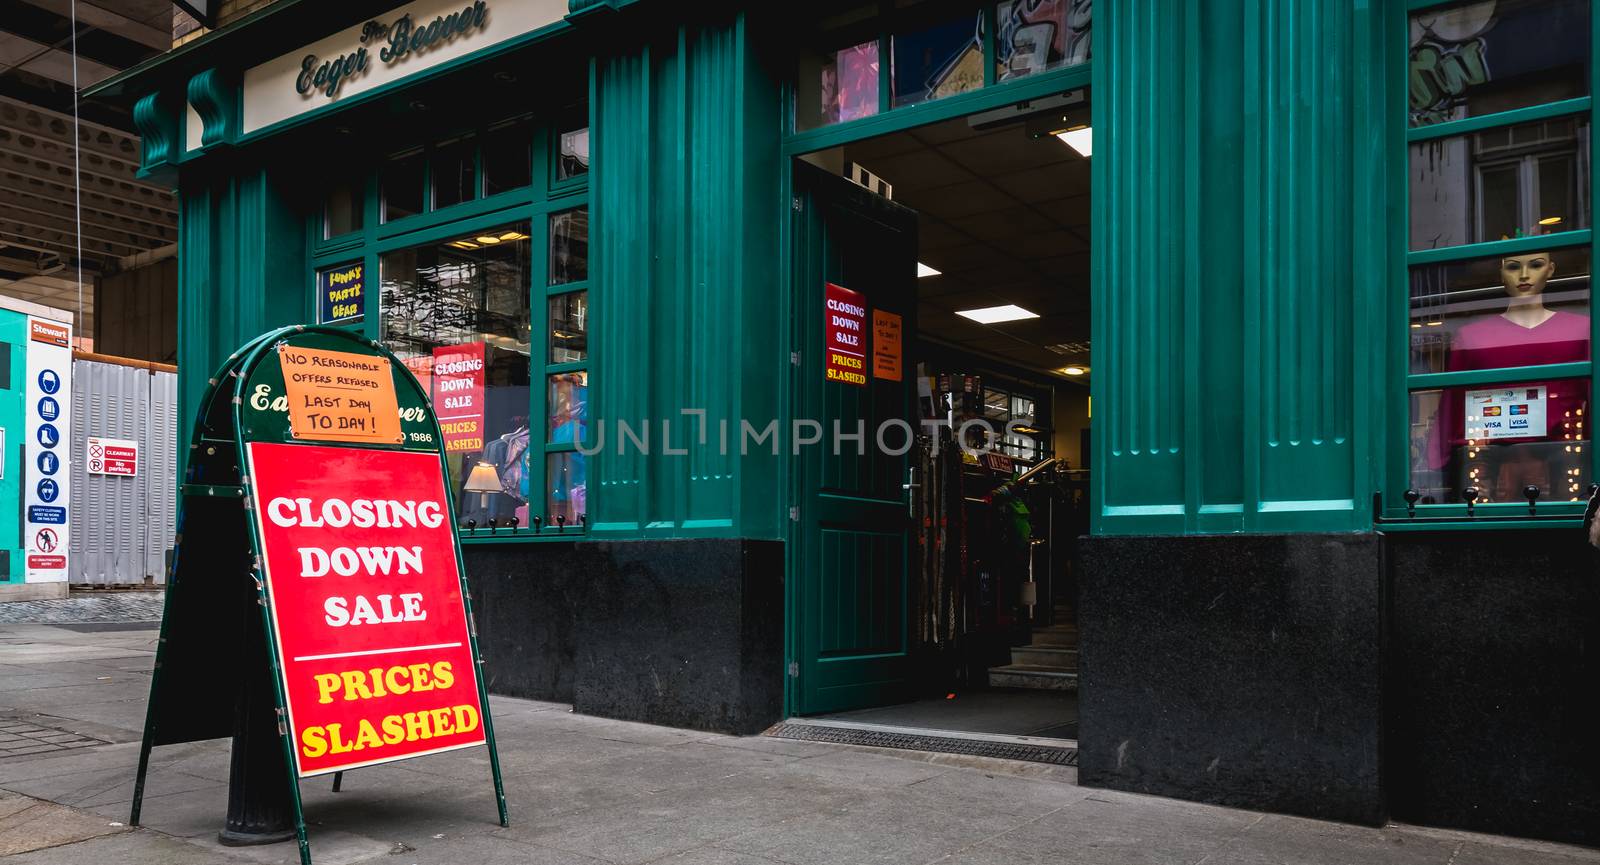 Dublin, Ireland - February 16, 2019: Closing Down Sale - Prices Slashed - No reasonable offers refused - Last day to day - on a street sign outside a city center store on a winter day